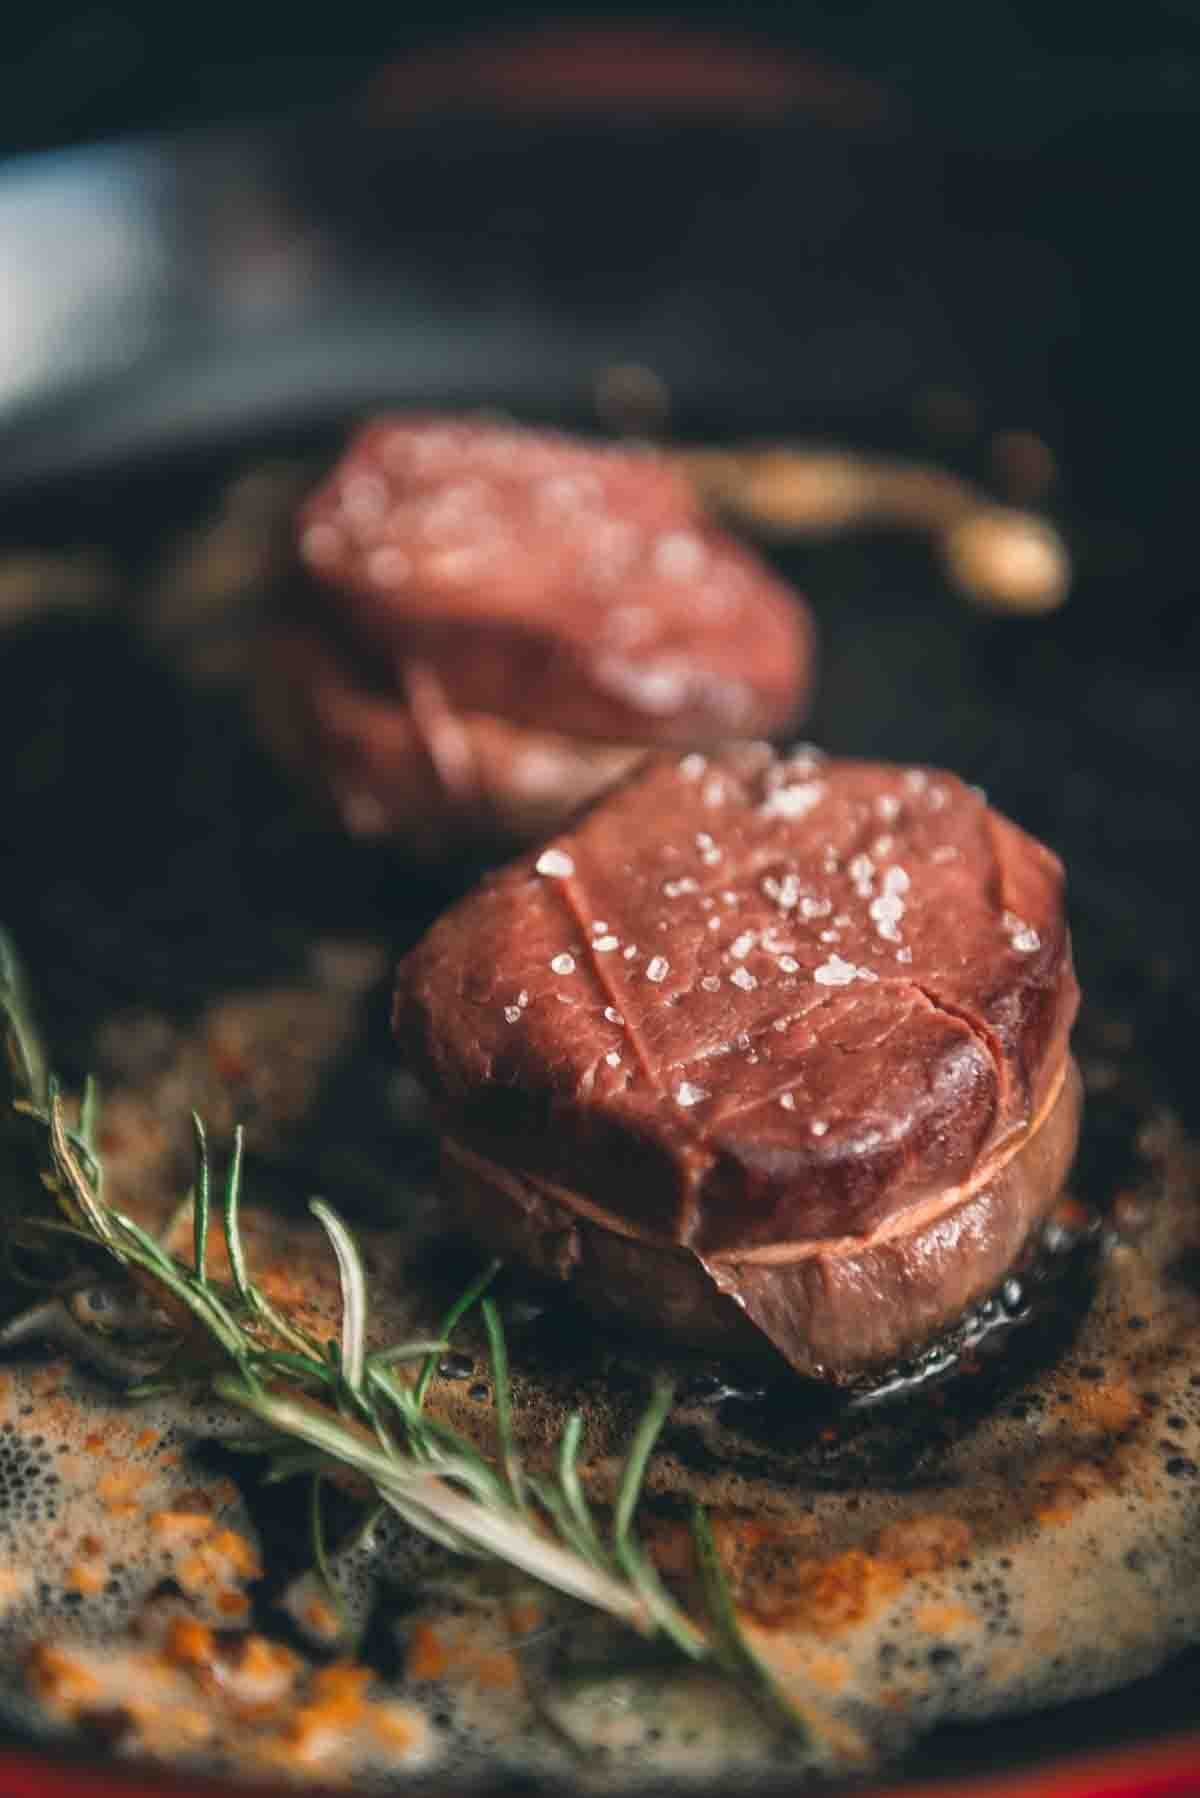 Filets placed in a hot pan.